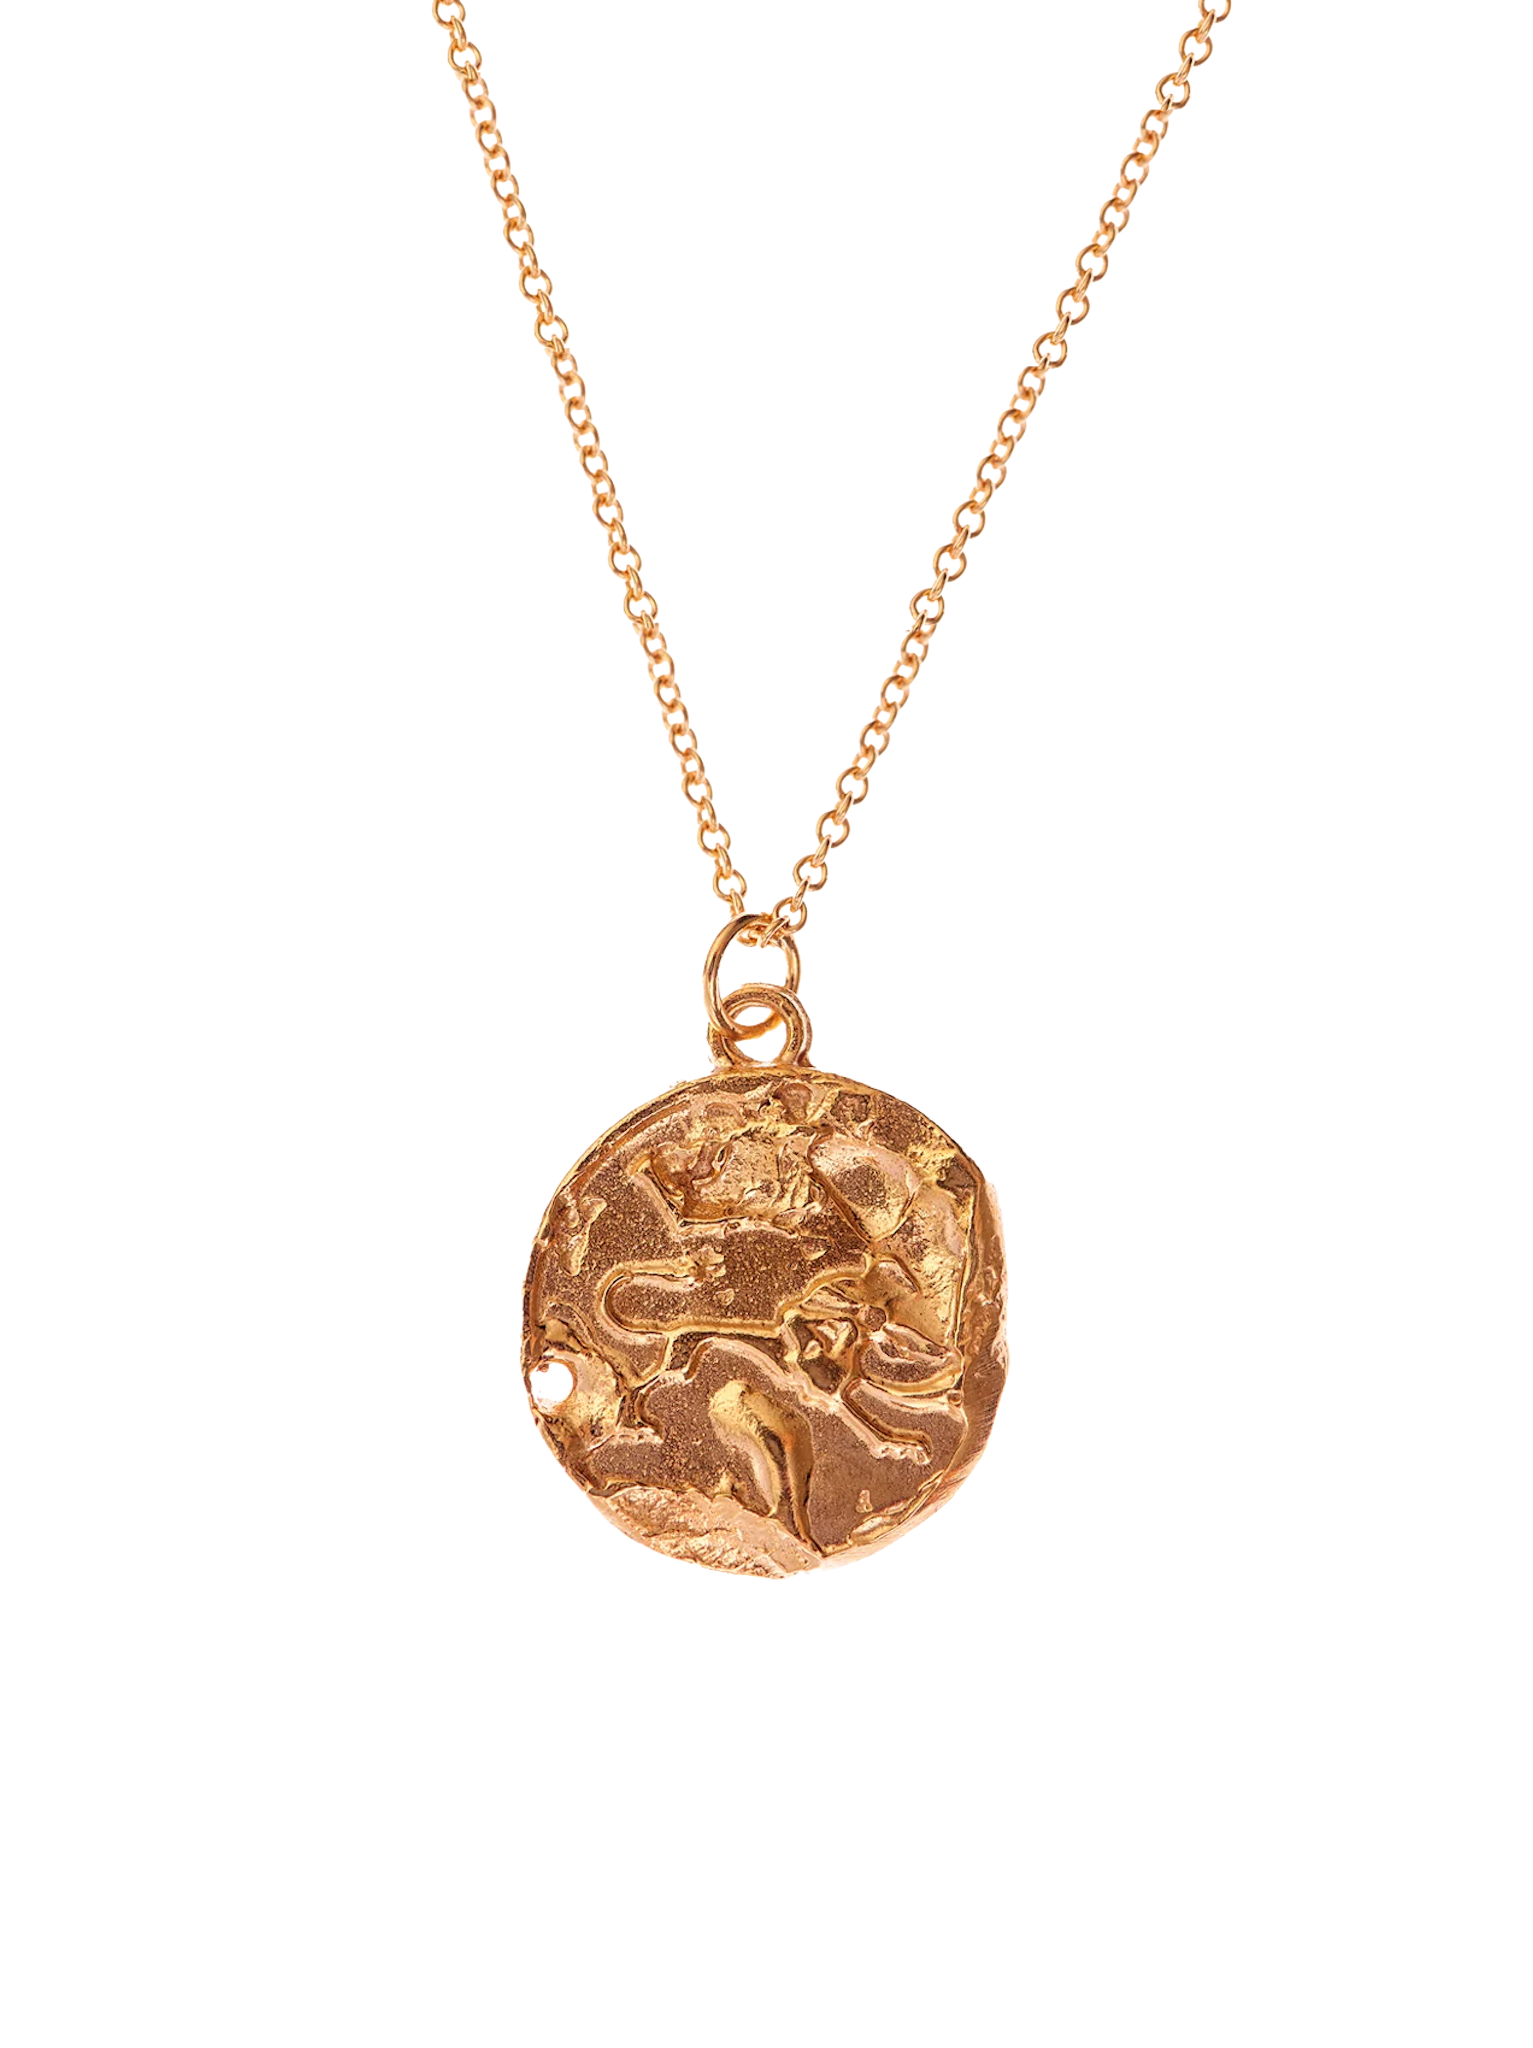 The leo medallion necklace